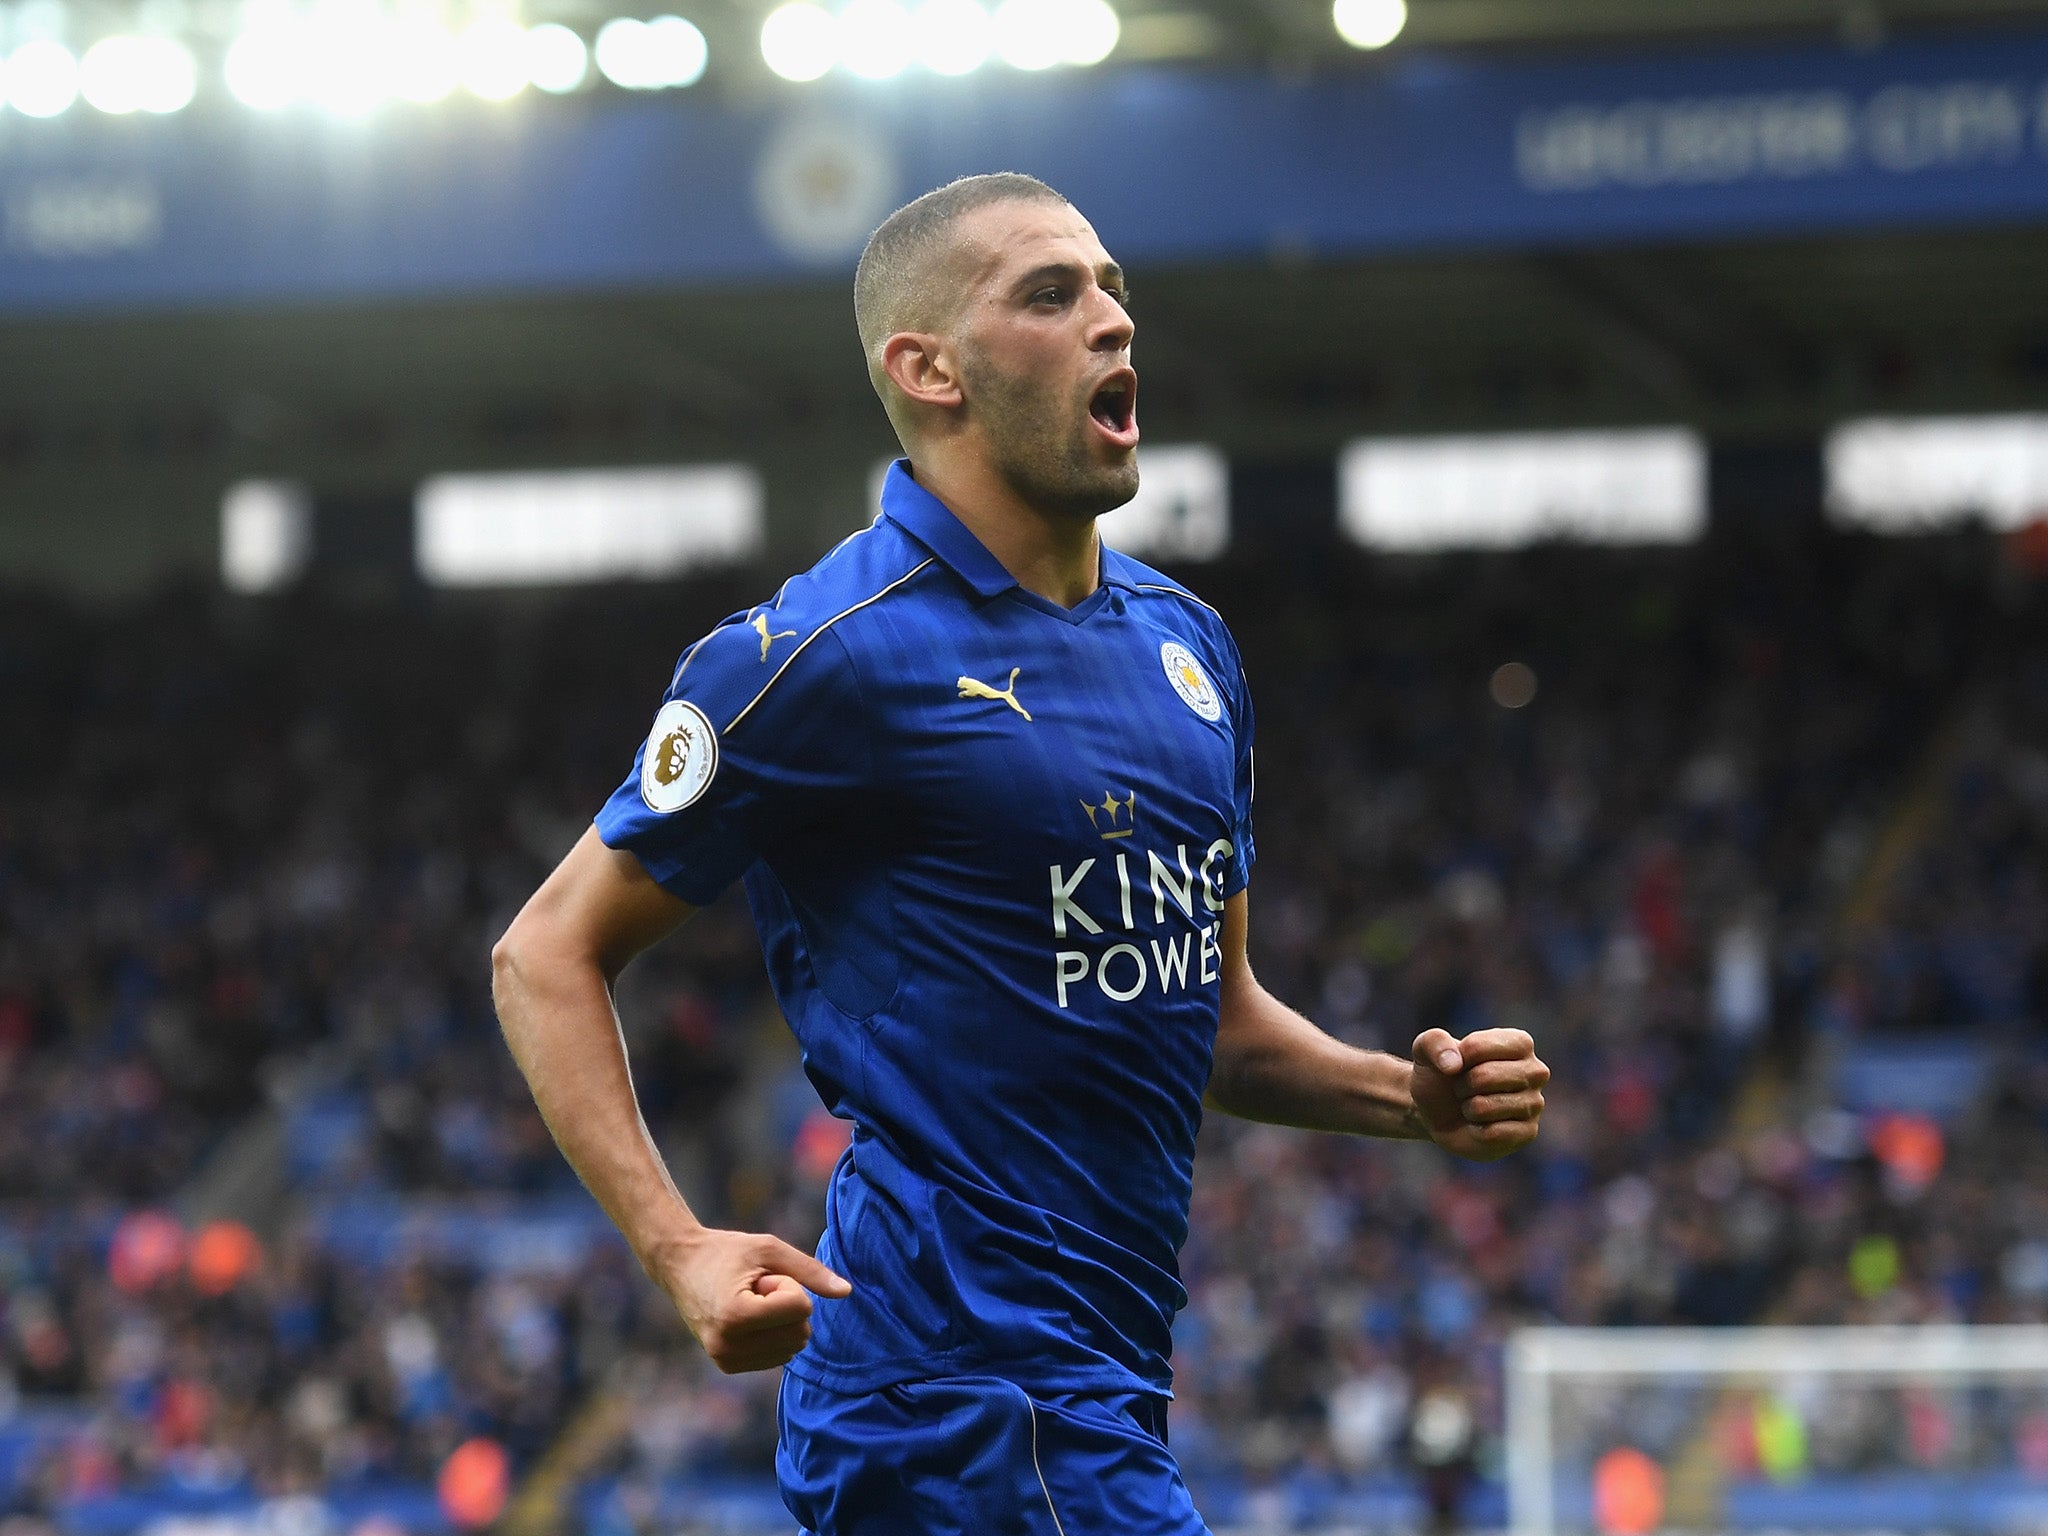 Islam Slimani got his Leicester career off to a flying start